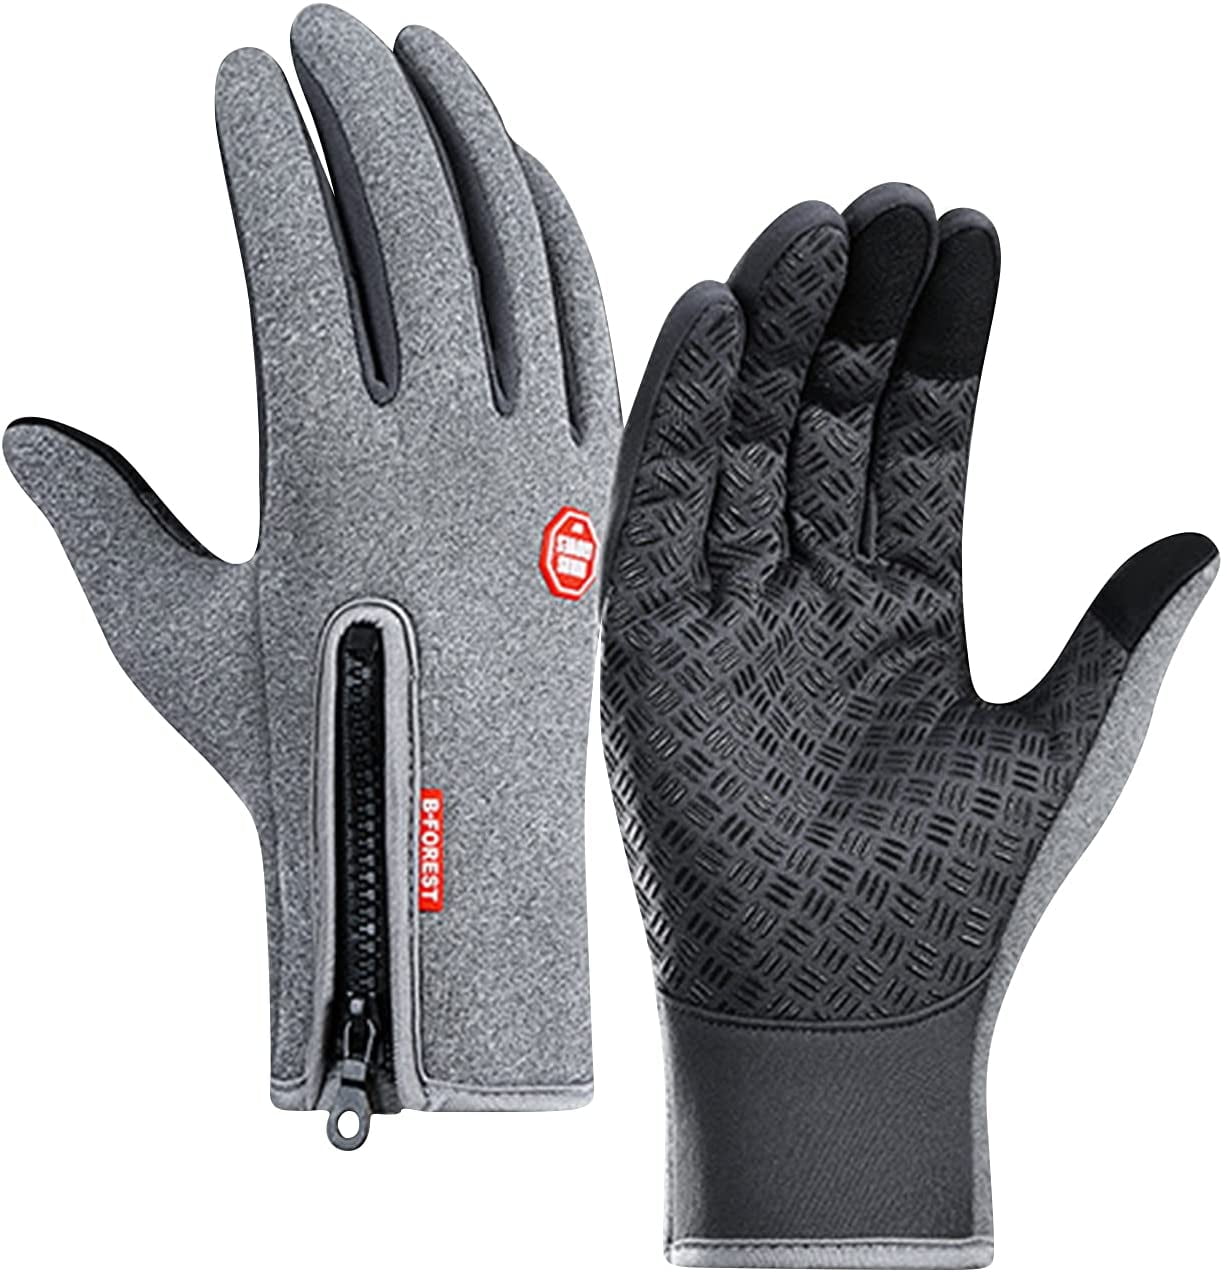 Youngate Mens Ski Gloves Winter Waterproof Warm Touchscreen Cold Weather Gloves 